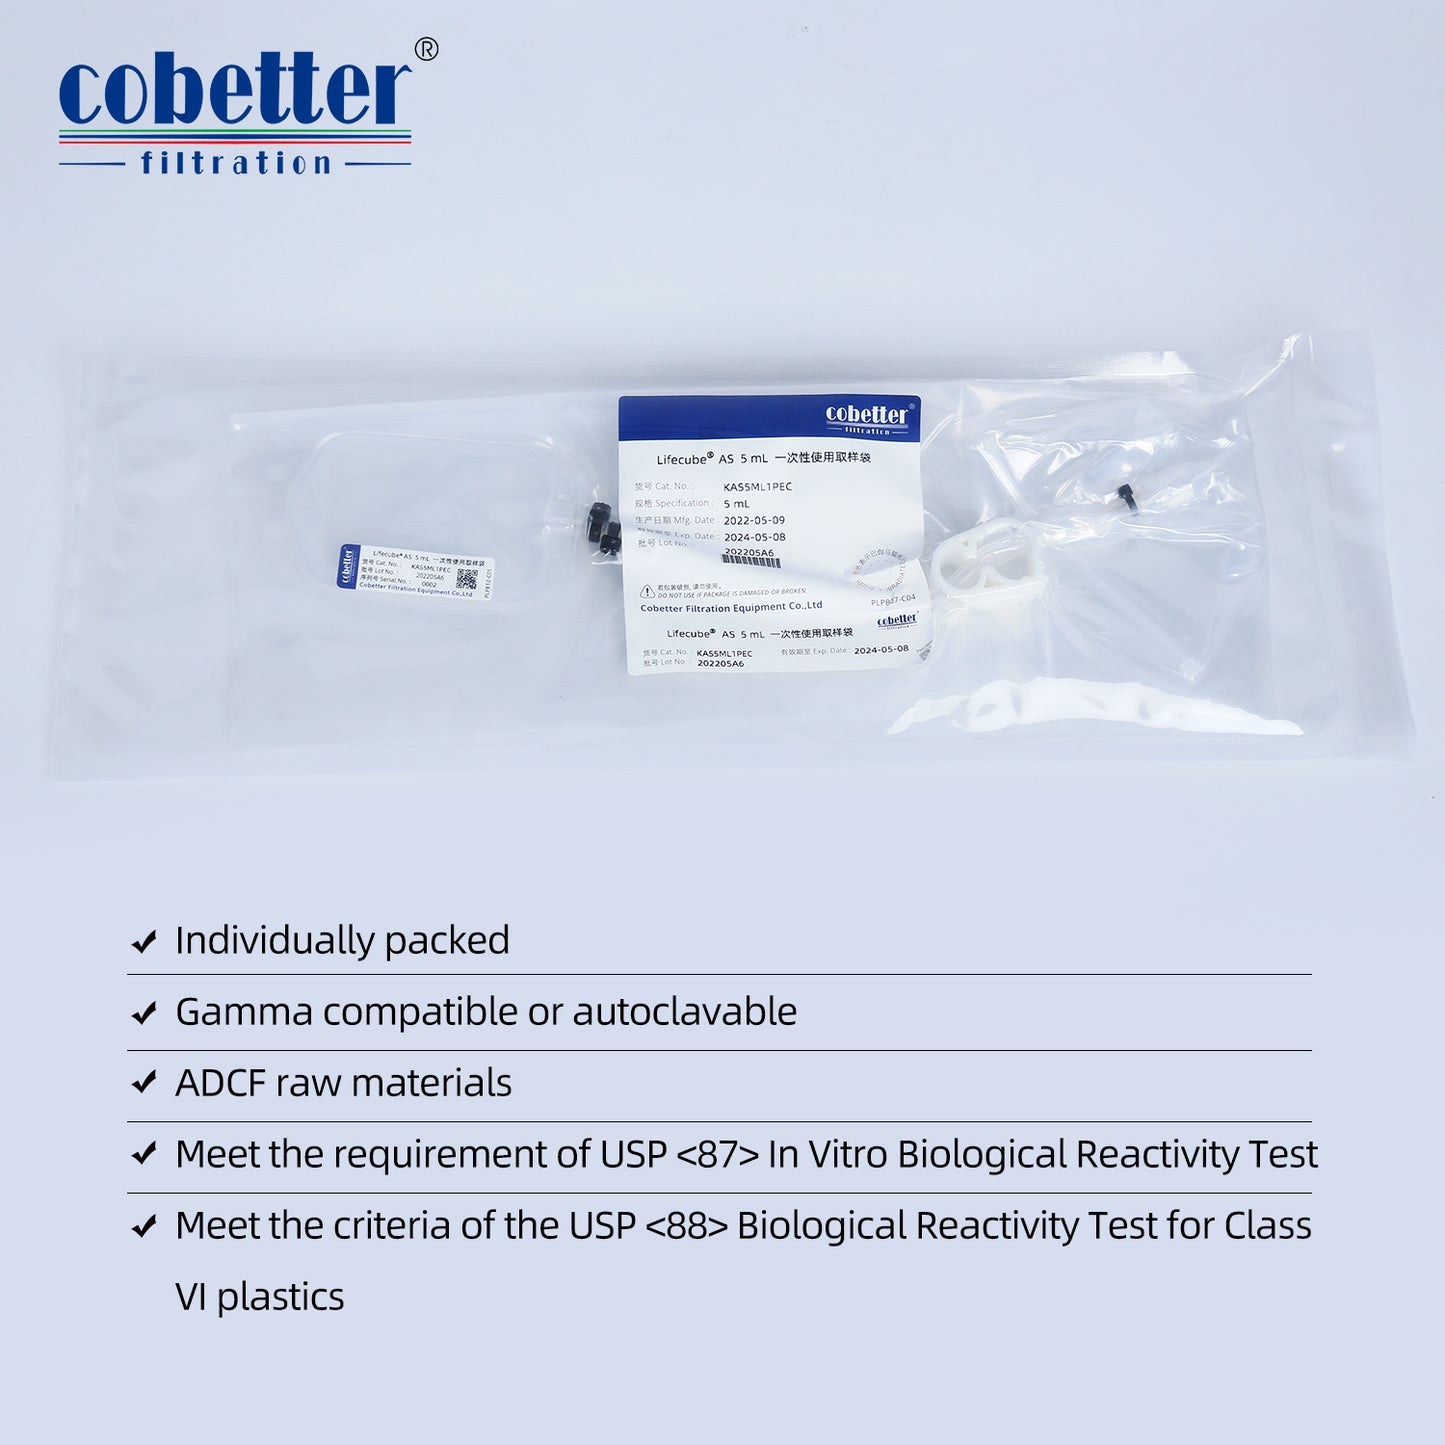 COBETTER 5mL Sampling Bag with 1/8''ID x 1/4''OD Tubing Sterile by Gamma Irradiation